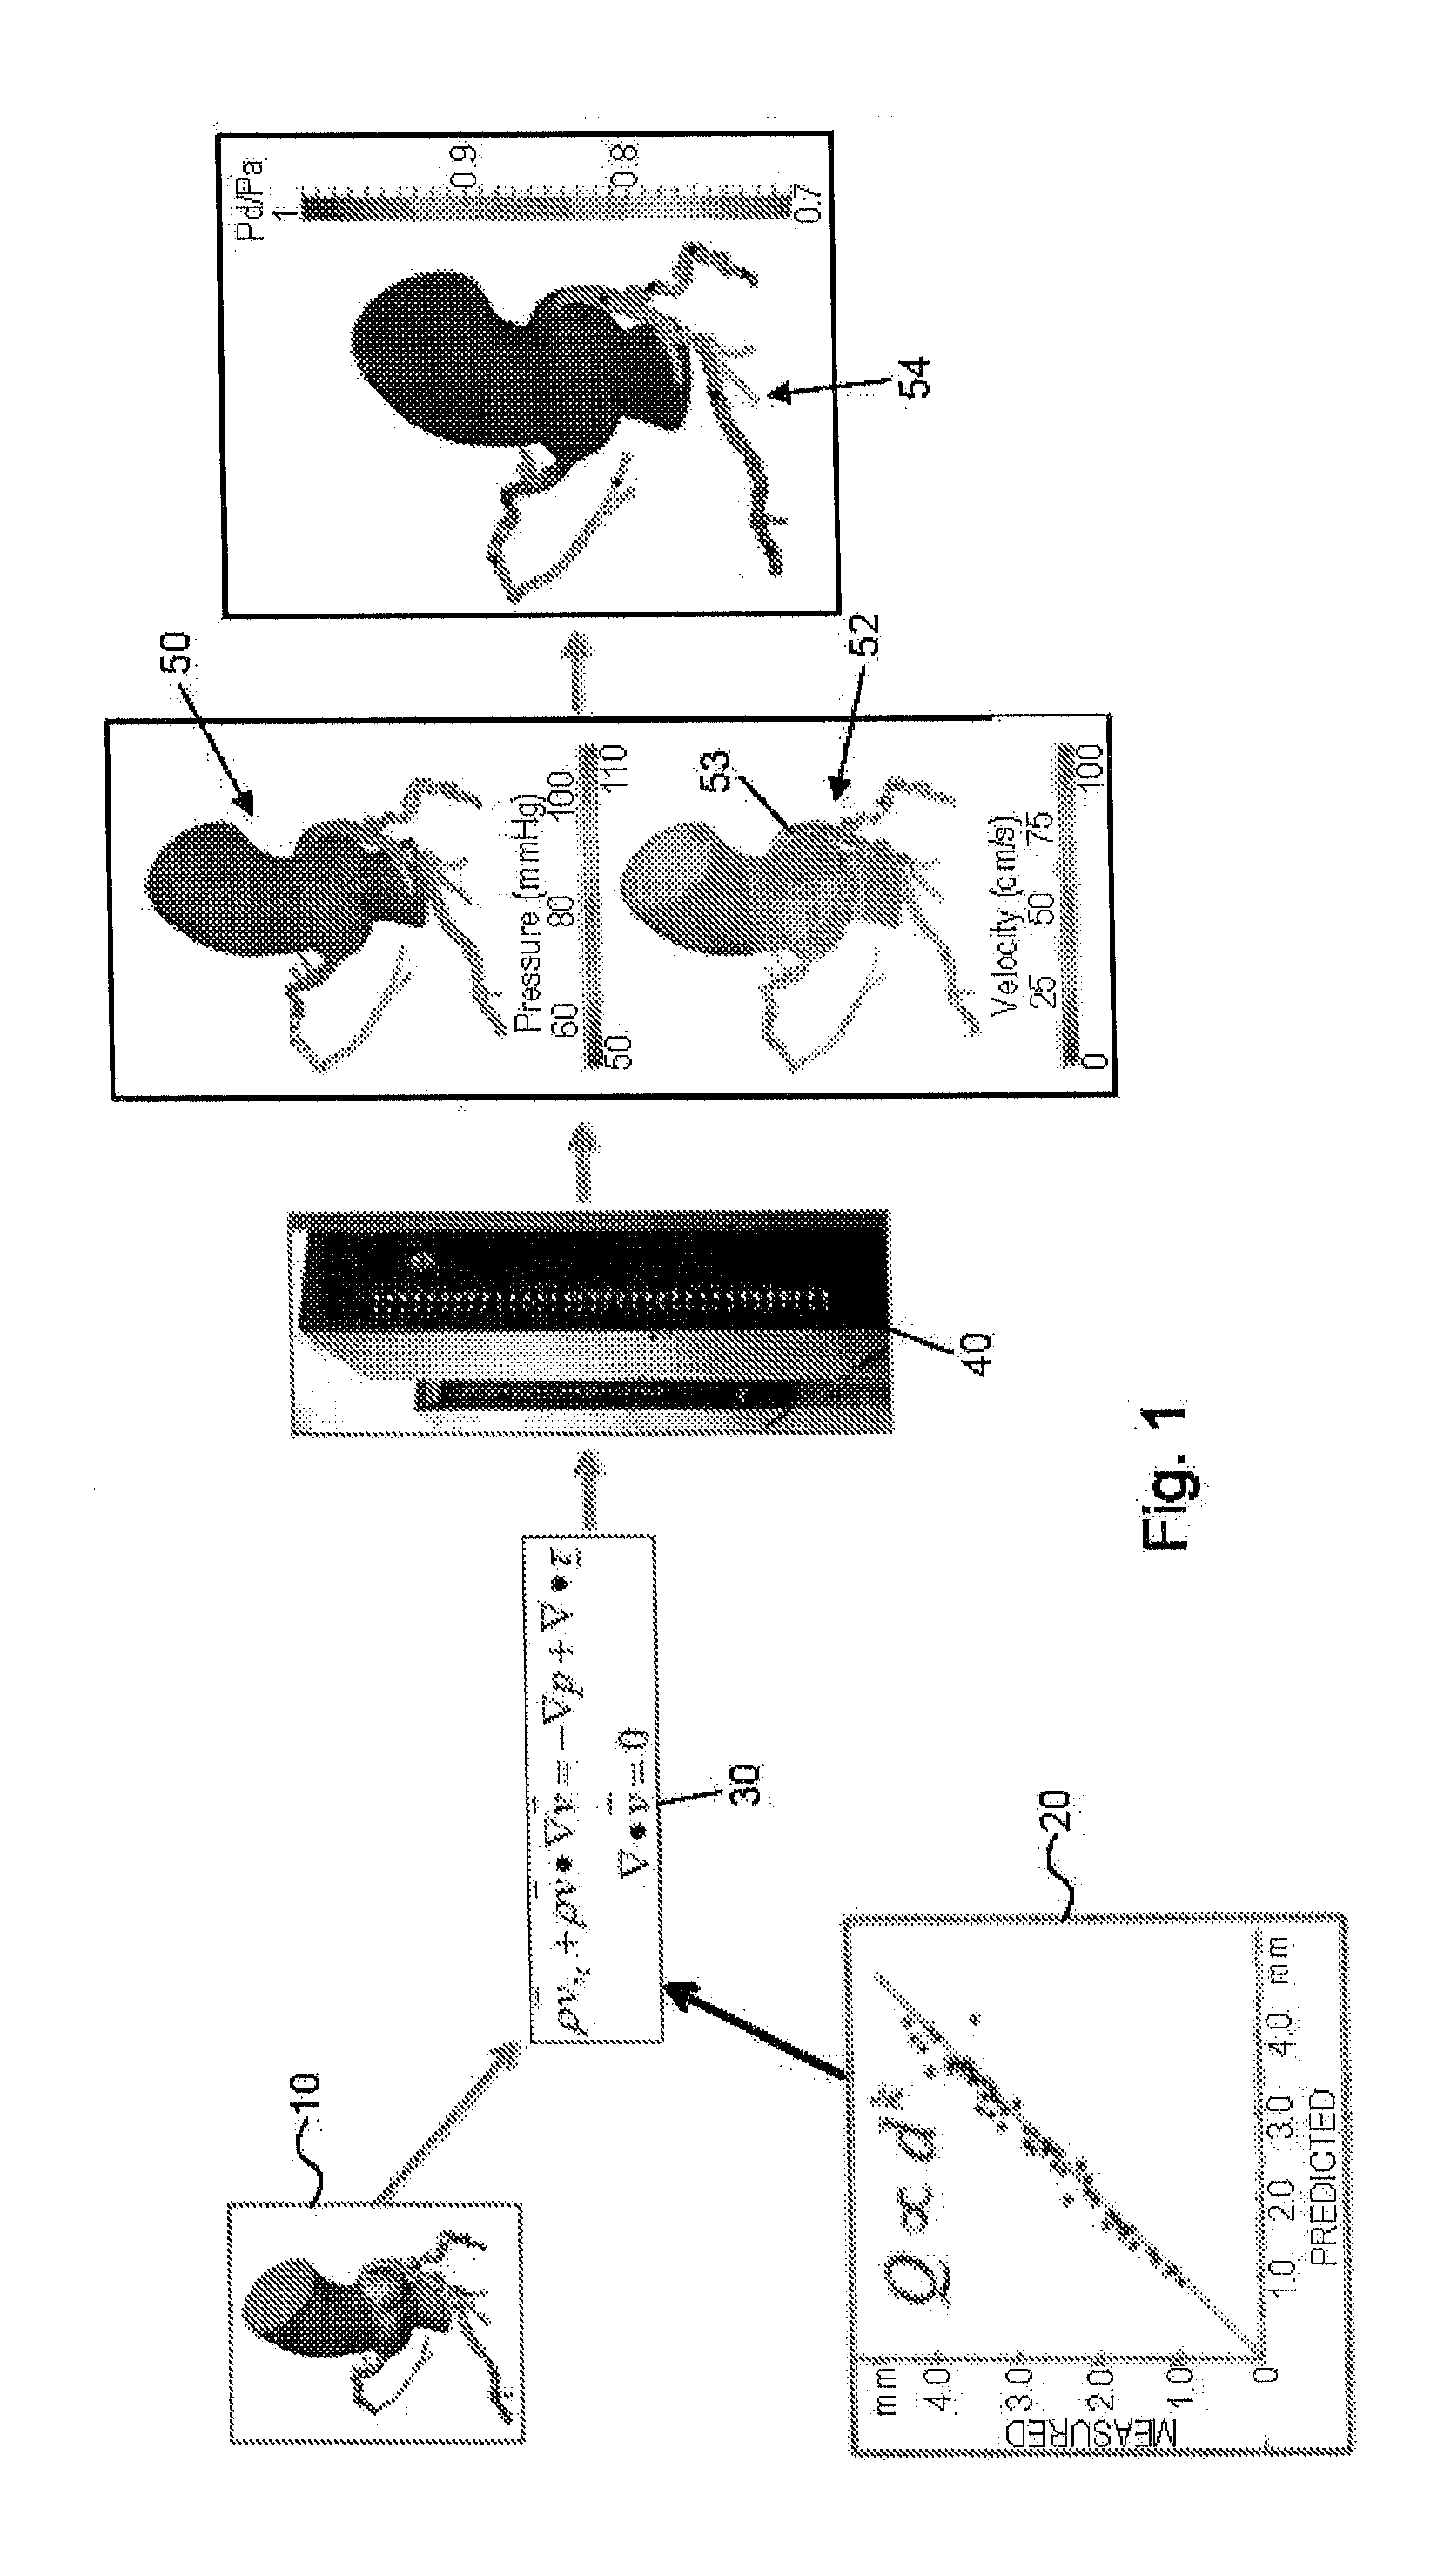 Method and system for determining treatments by modifying patient-specific geometrical models